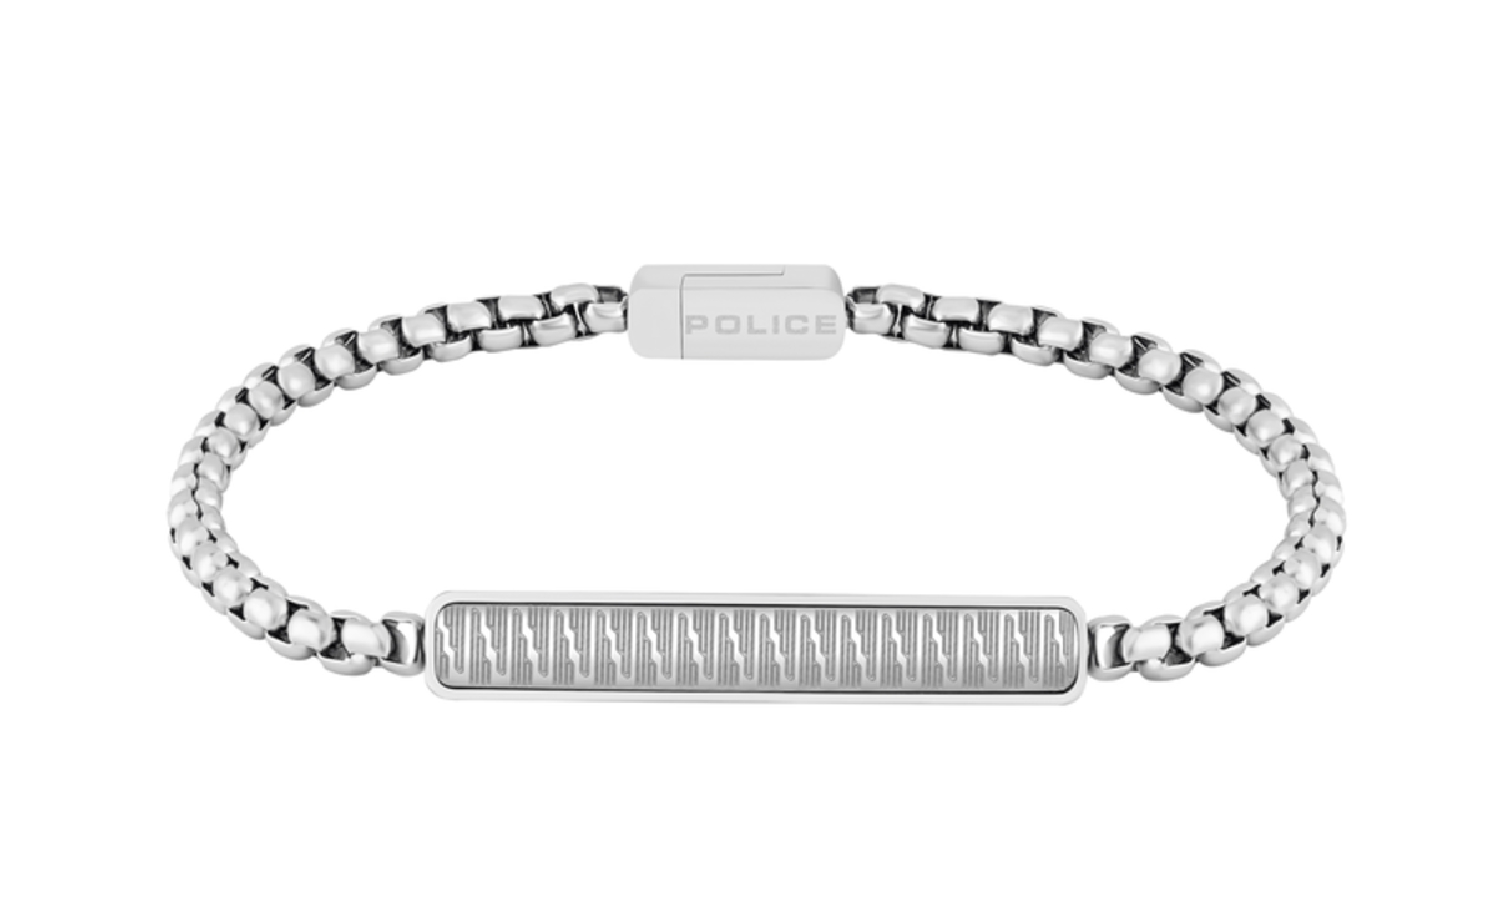 Buy Police Crank Textured Chain Stainless Steel Bracelet For Men -  PEAGB0032301 at Amazon.in